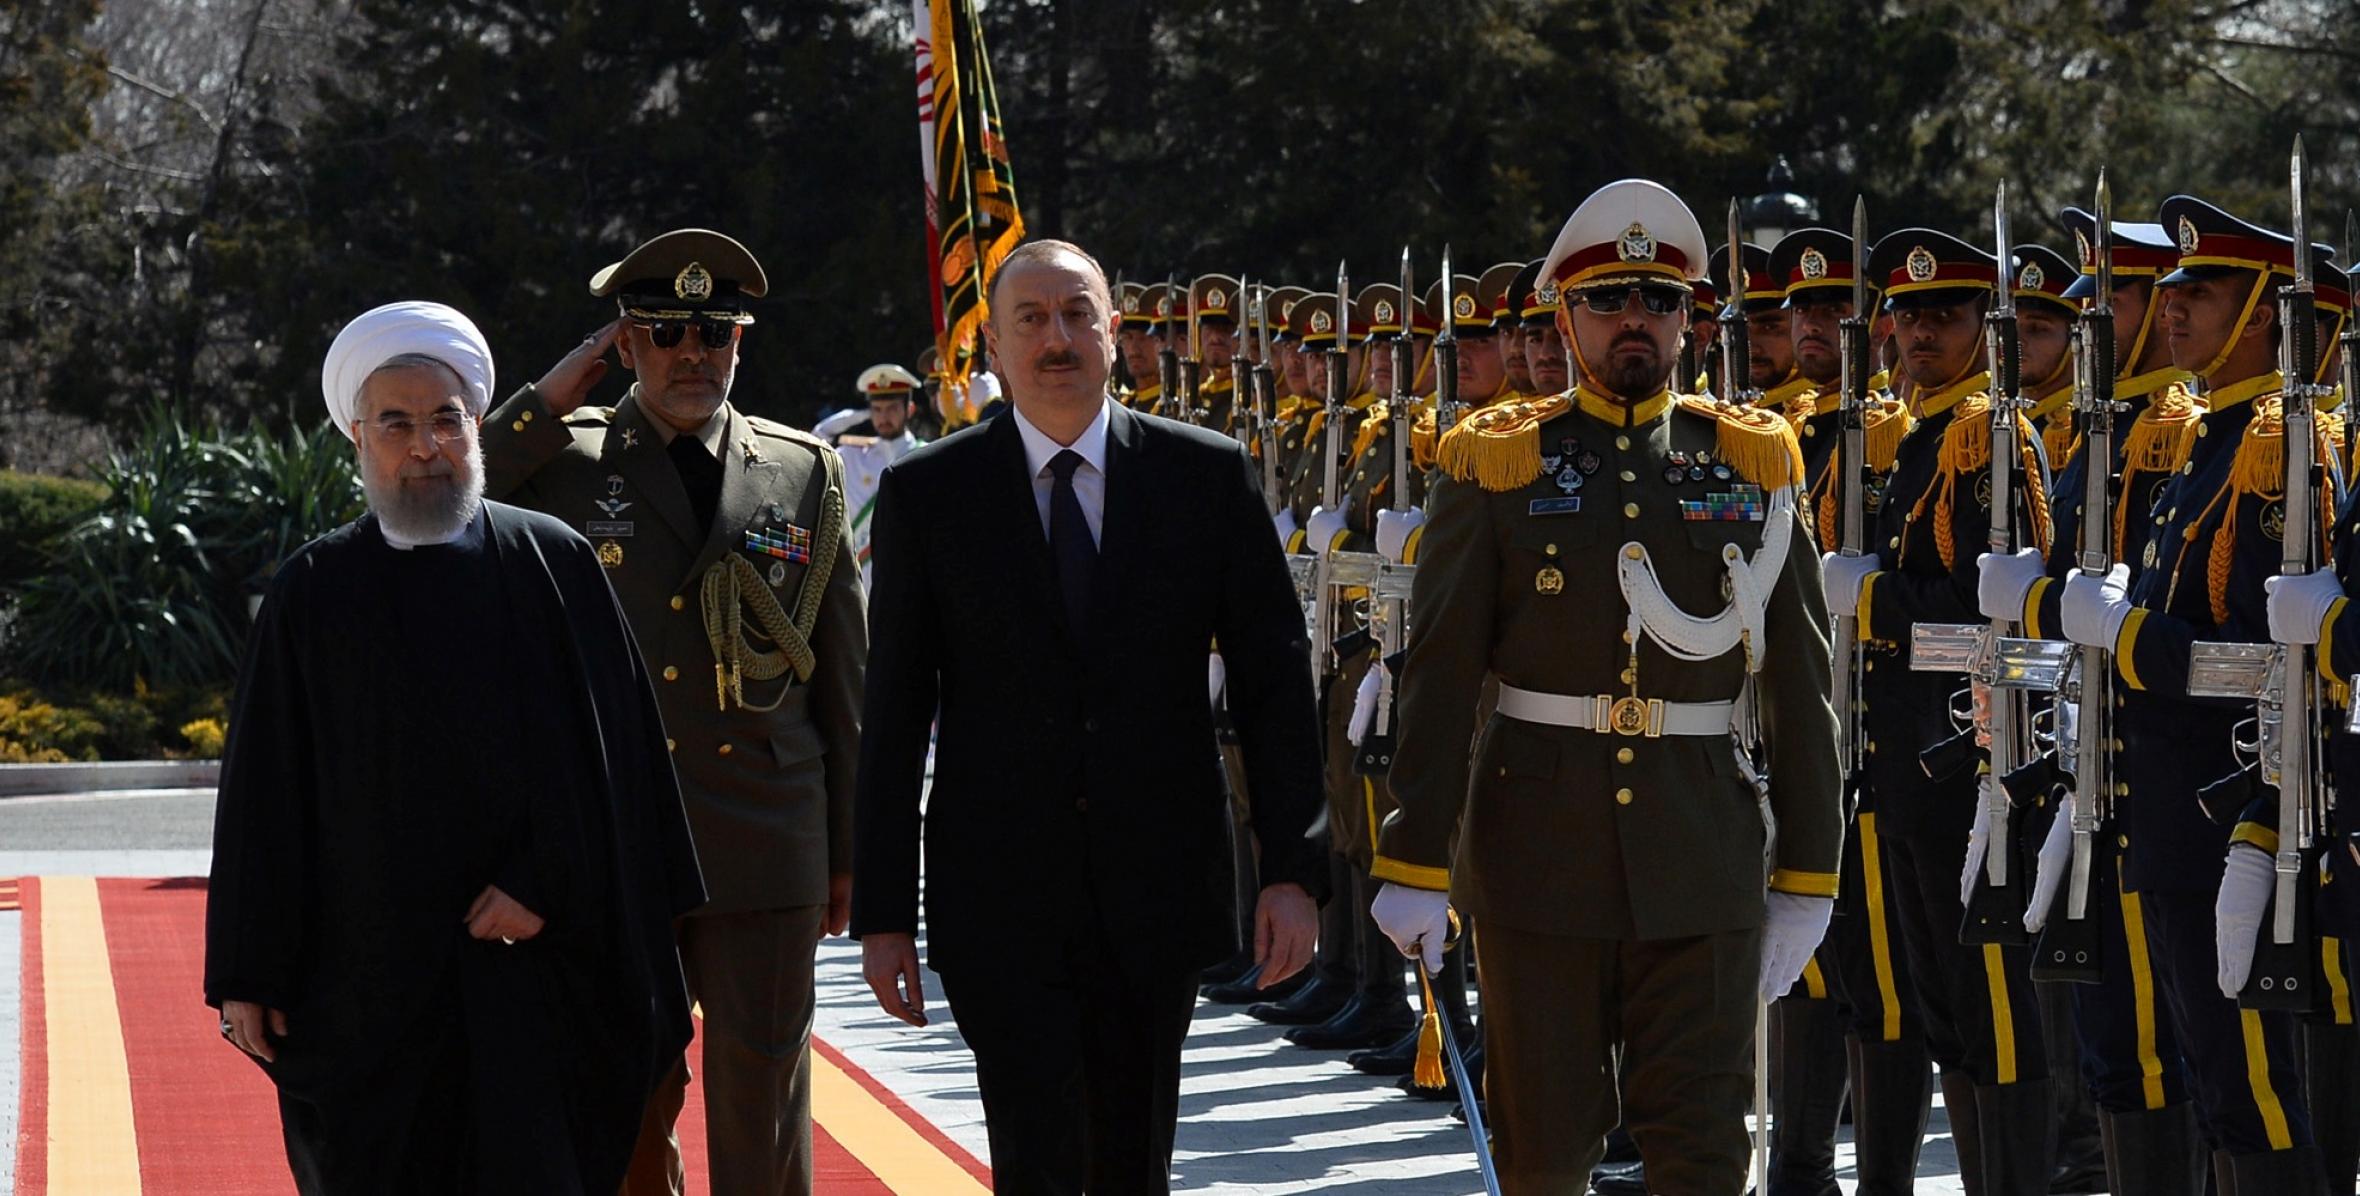 Official welcoming ceremony for President Ilham Aliyev was held in Iran